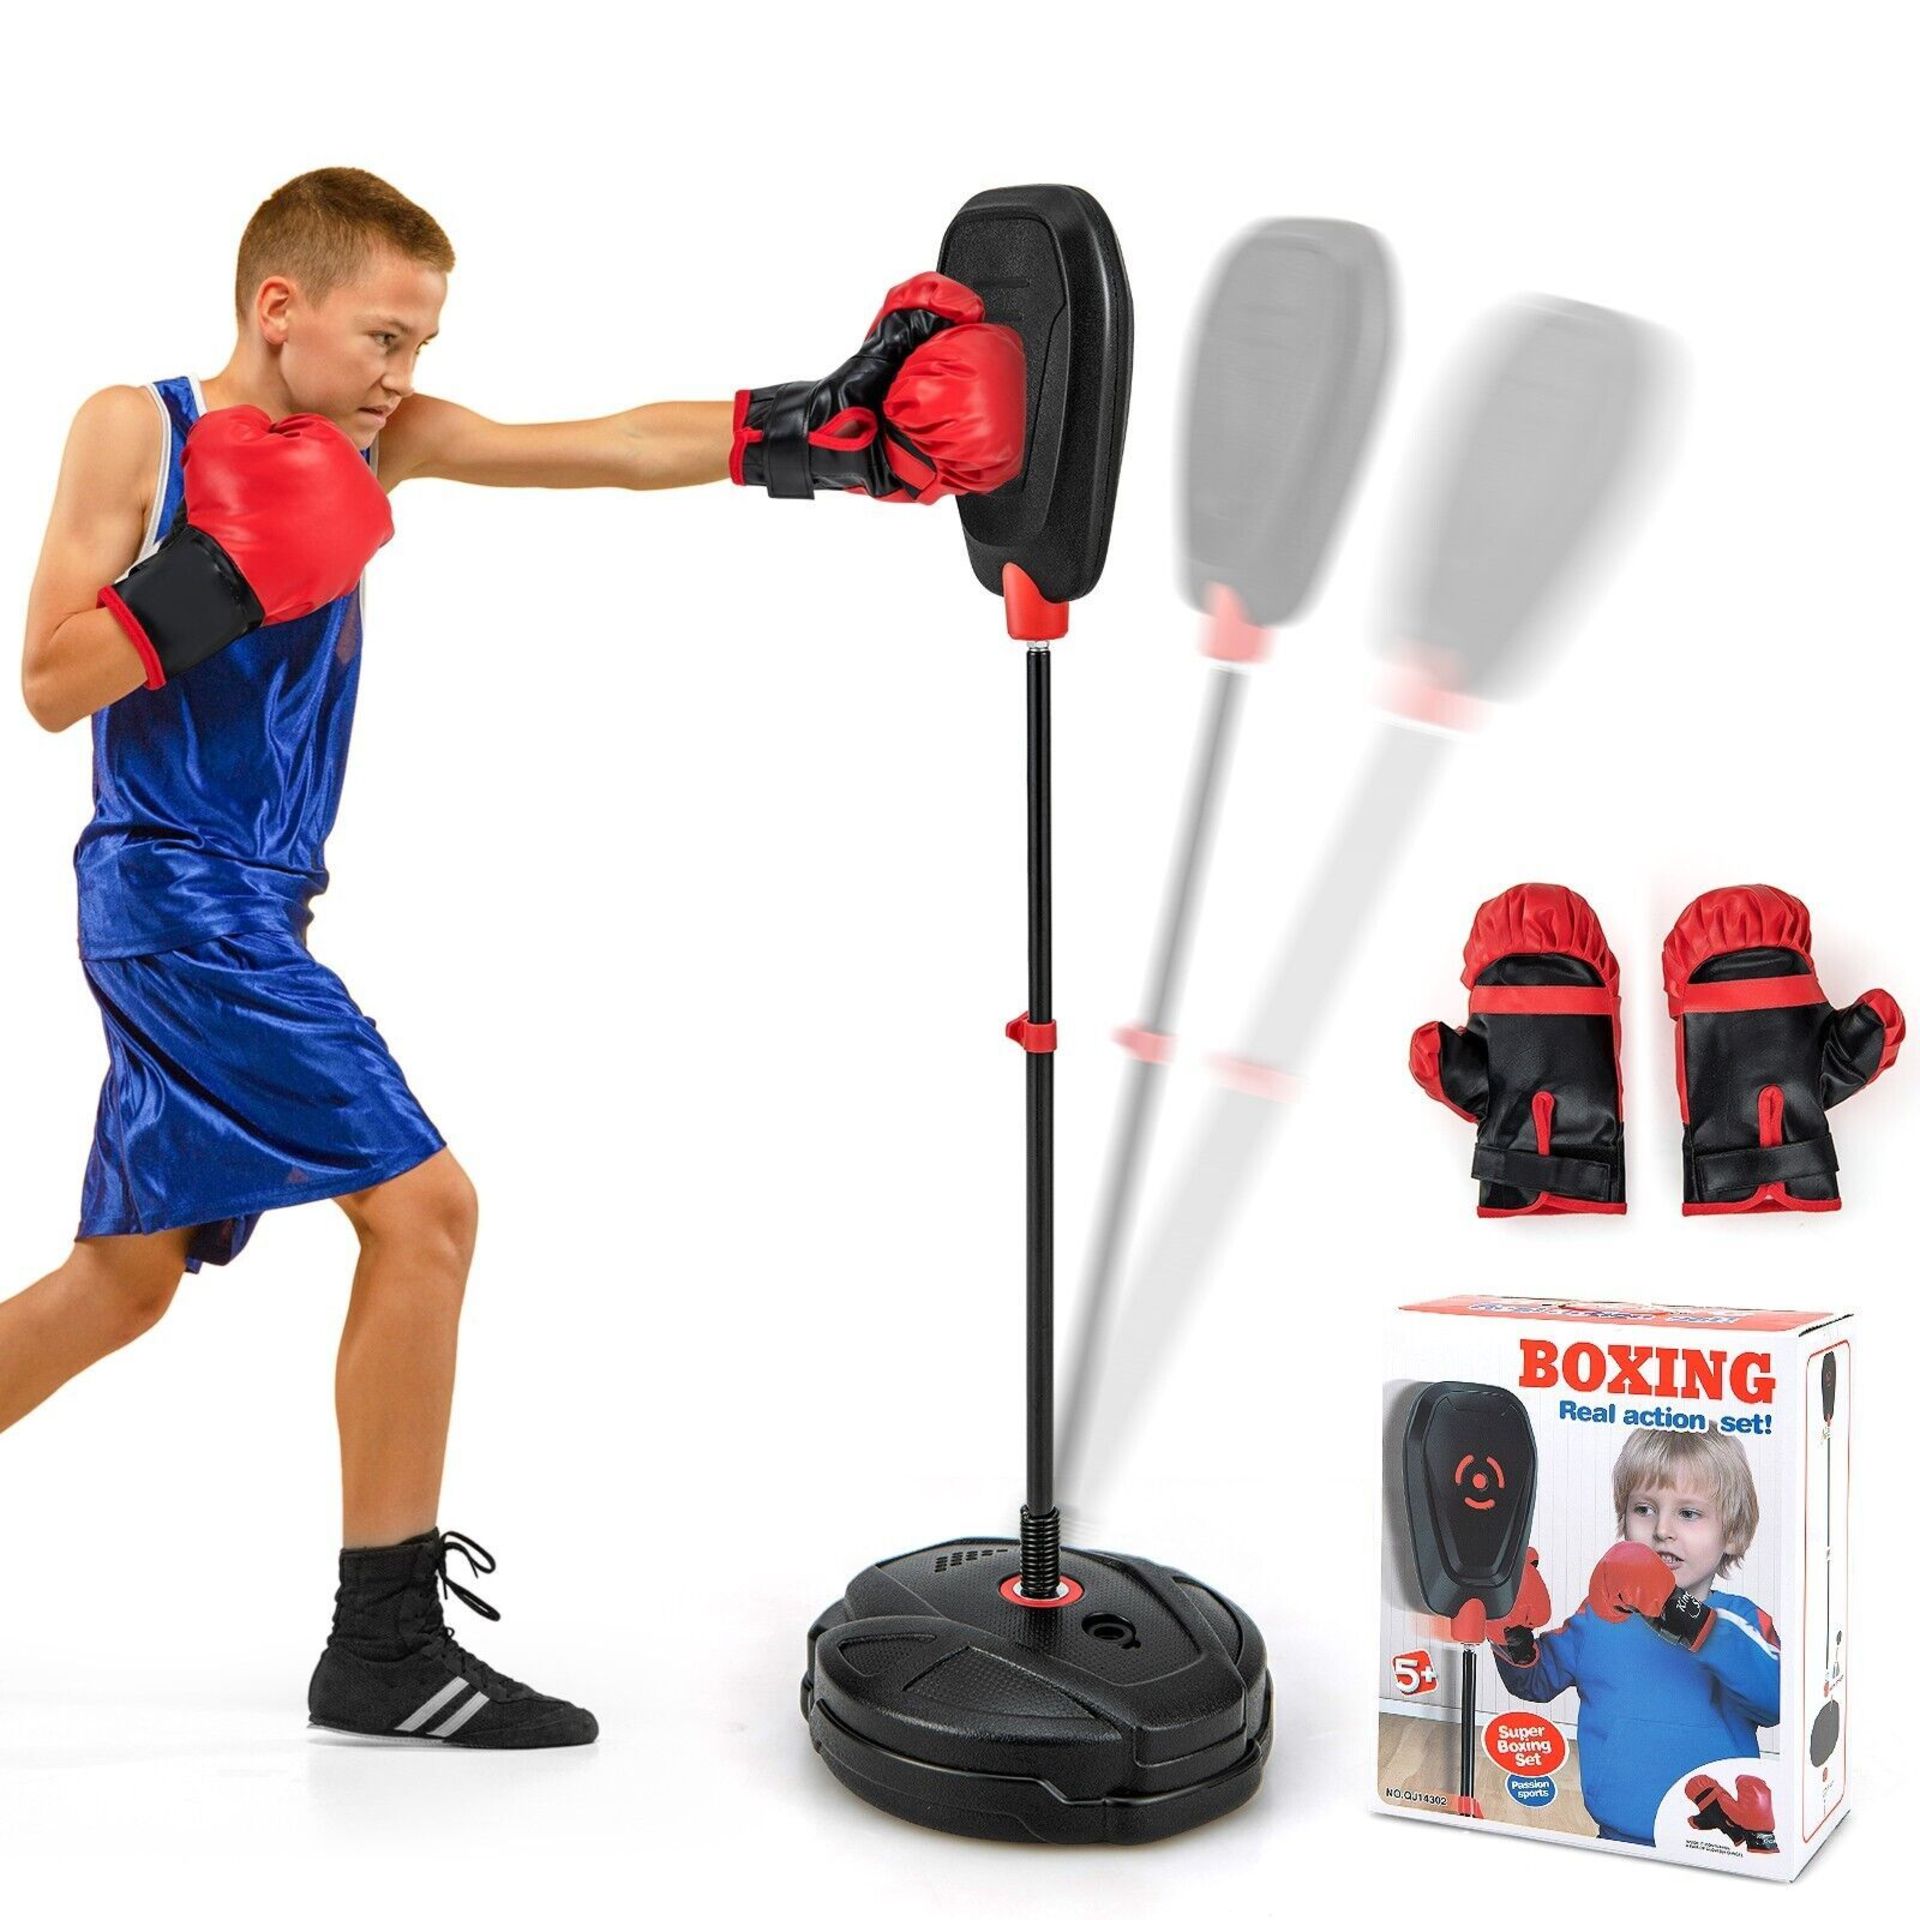 Inflation-Free Boxing set with Boxing Gloves Quick Rebound 6-Position Adjustable. - R14.2.